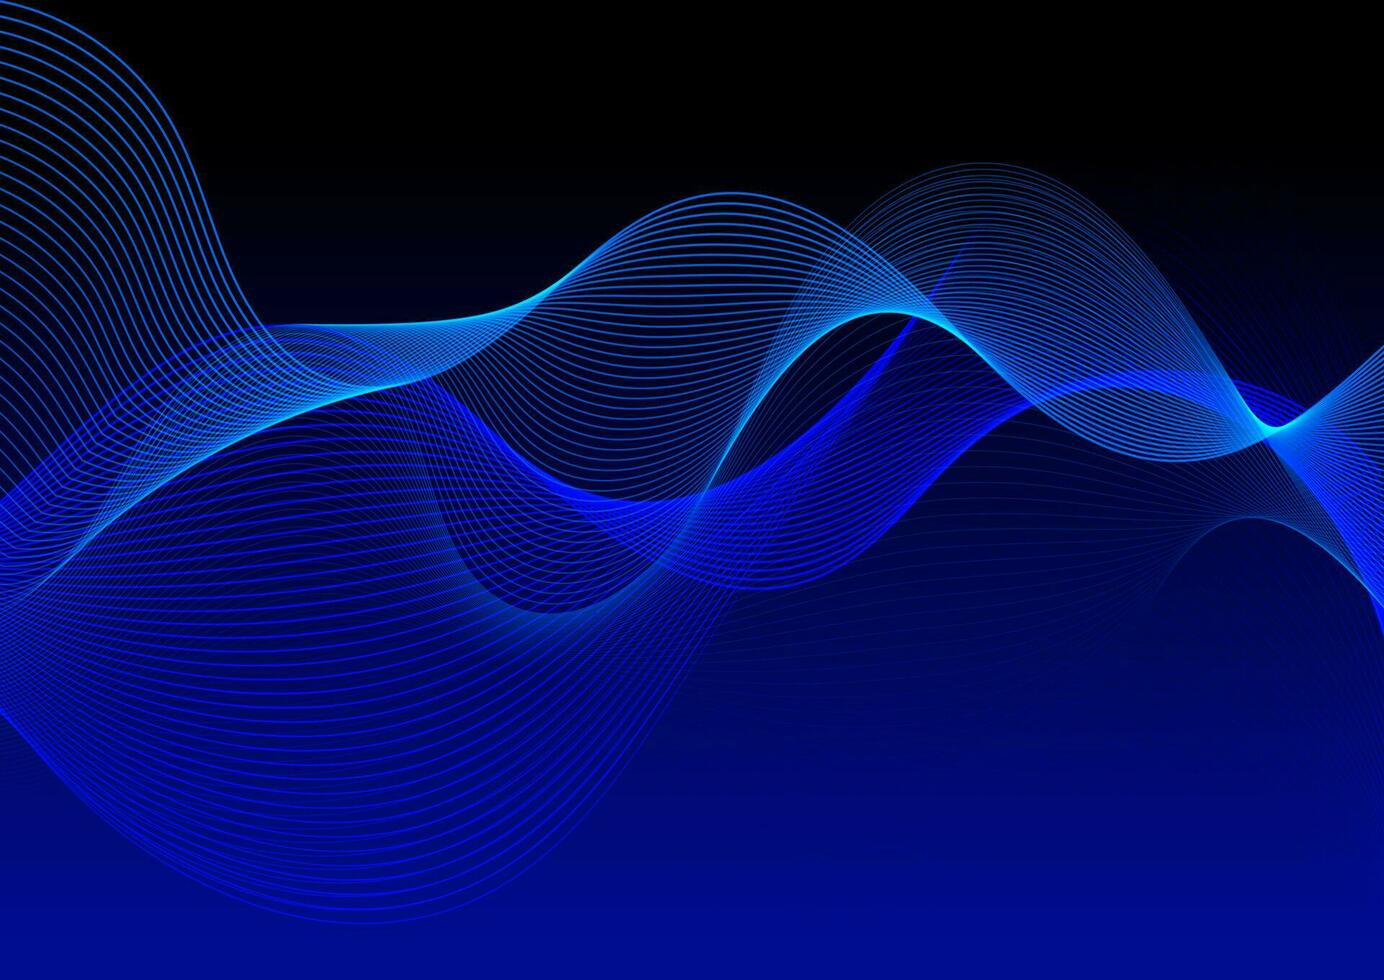 abstract network communications background with flowing lines design vector